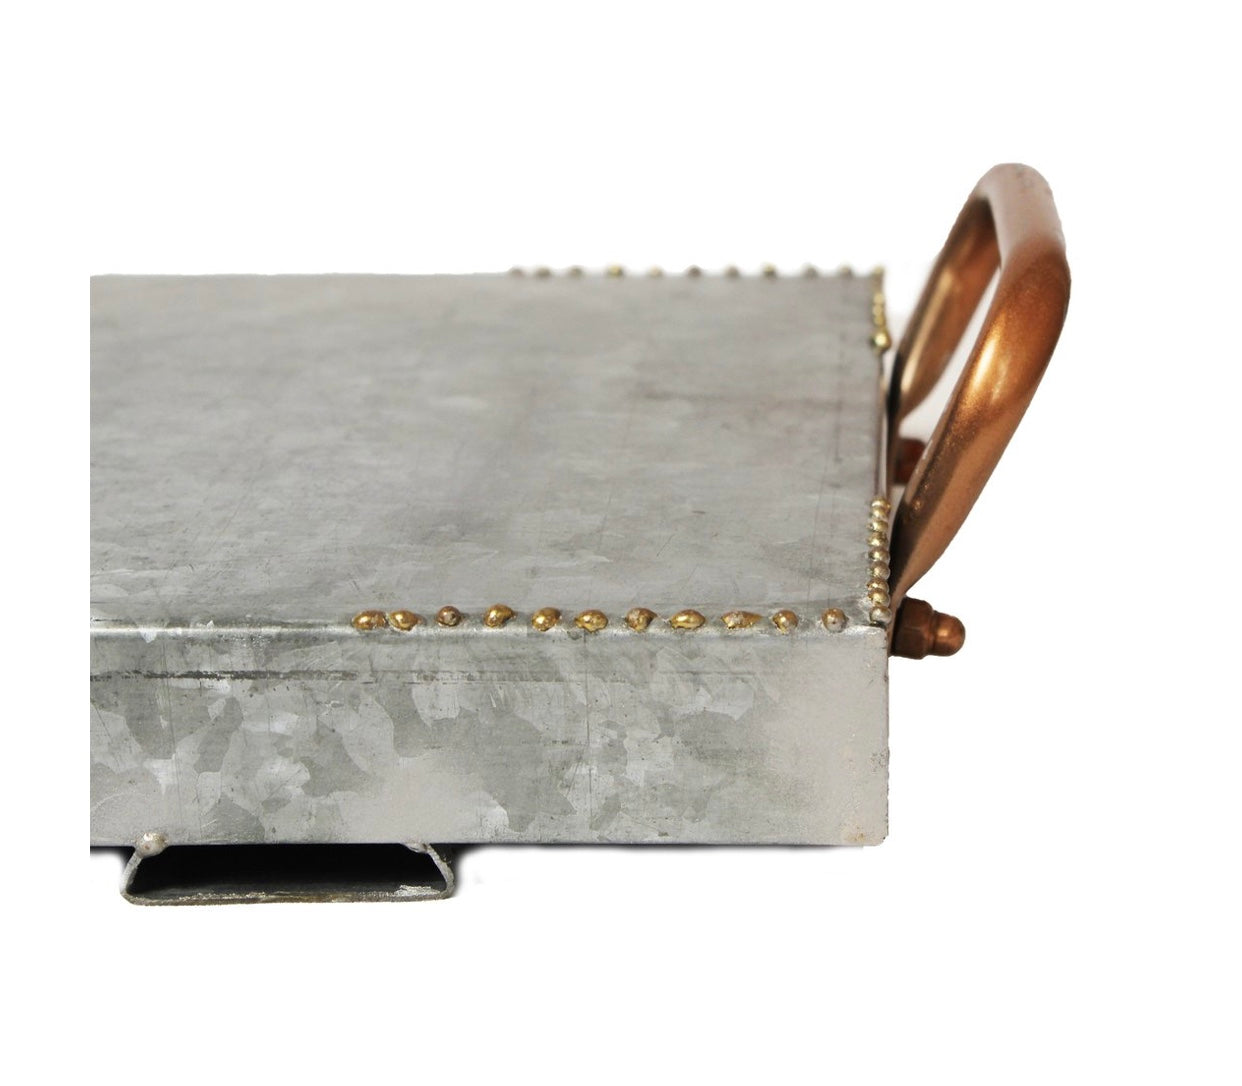 Galvanized Banquet Board with Copper Handles 39"